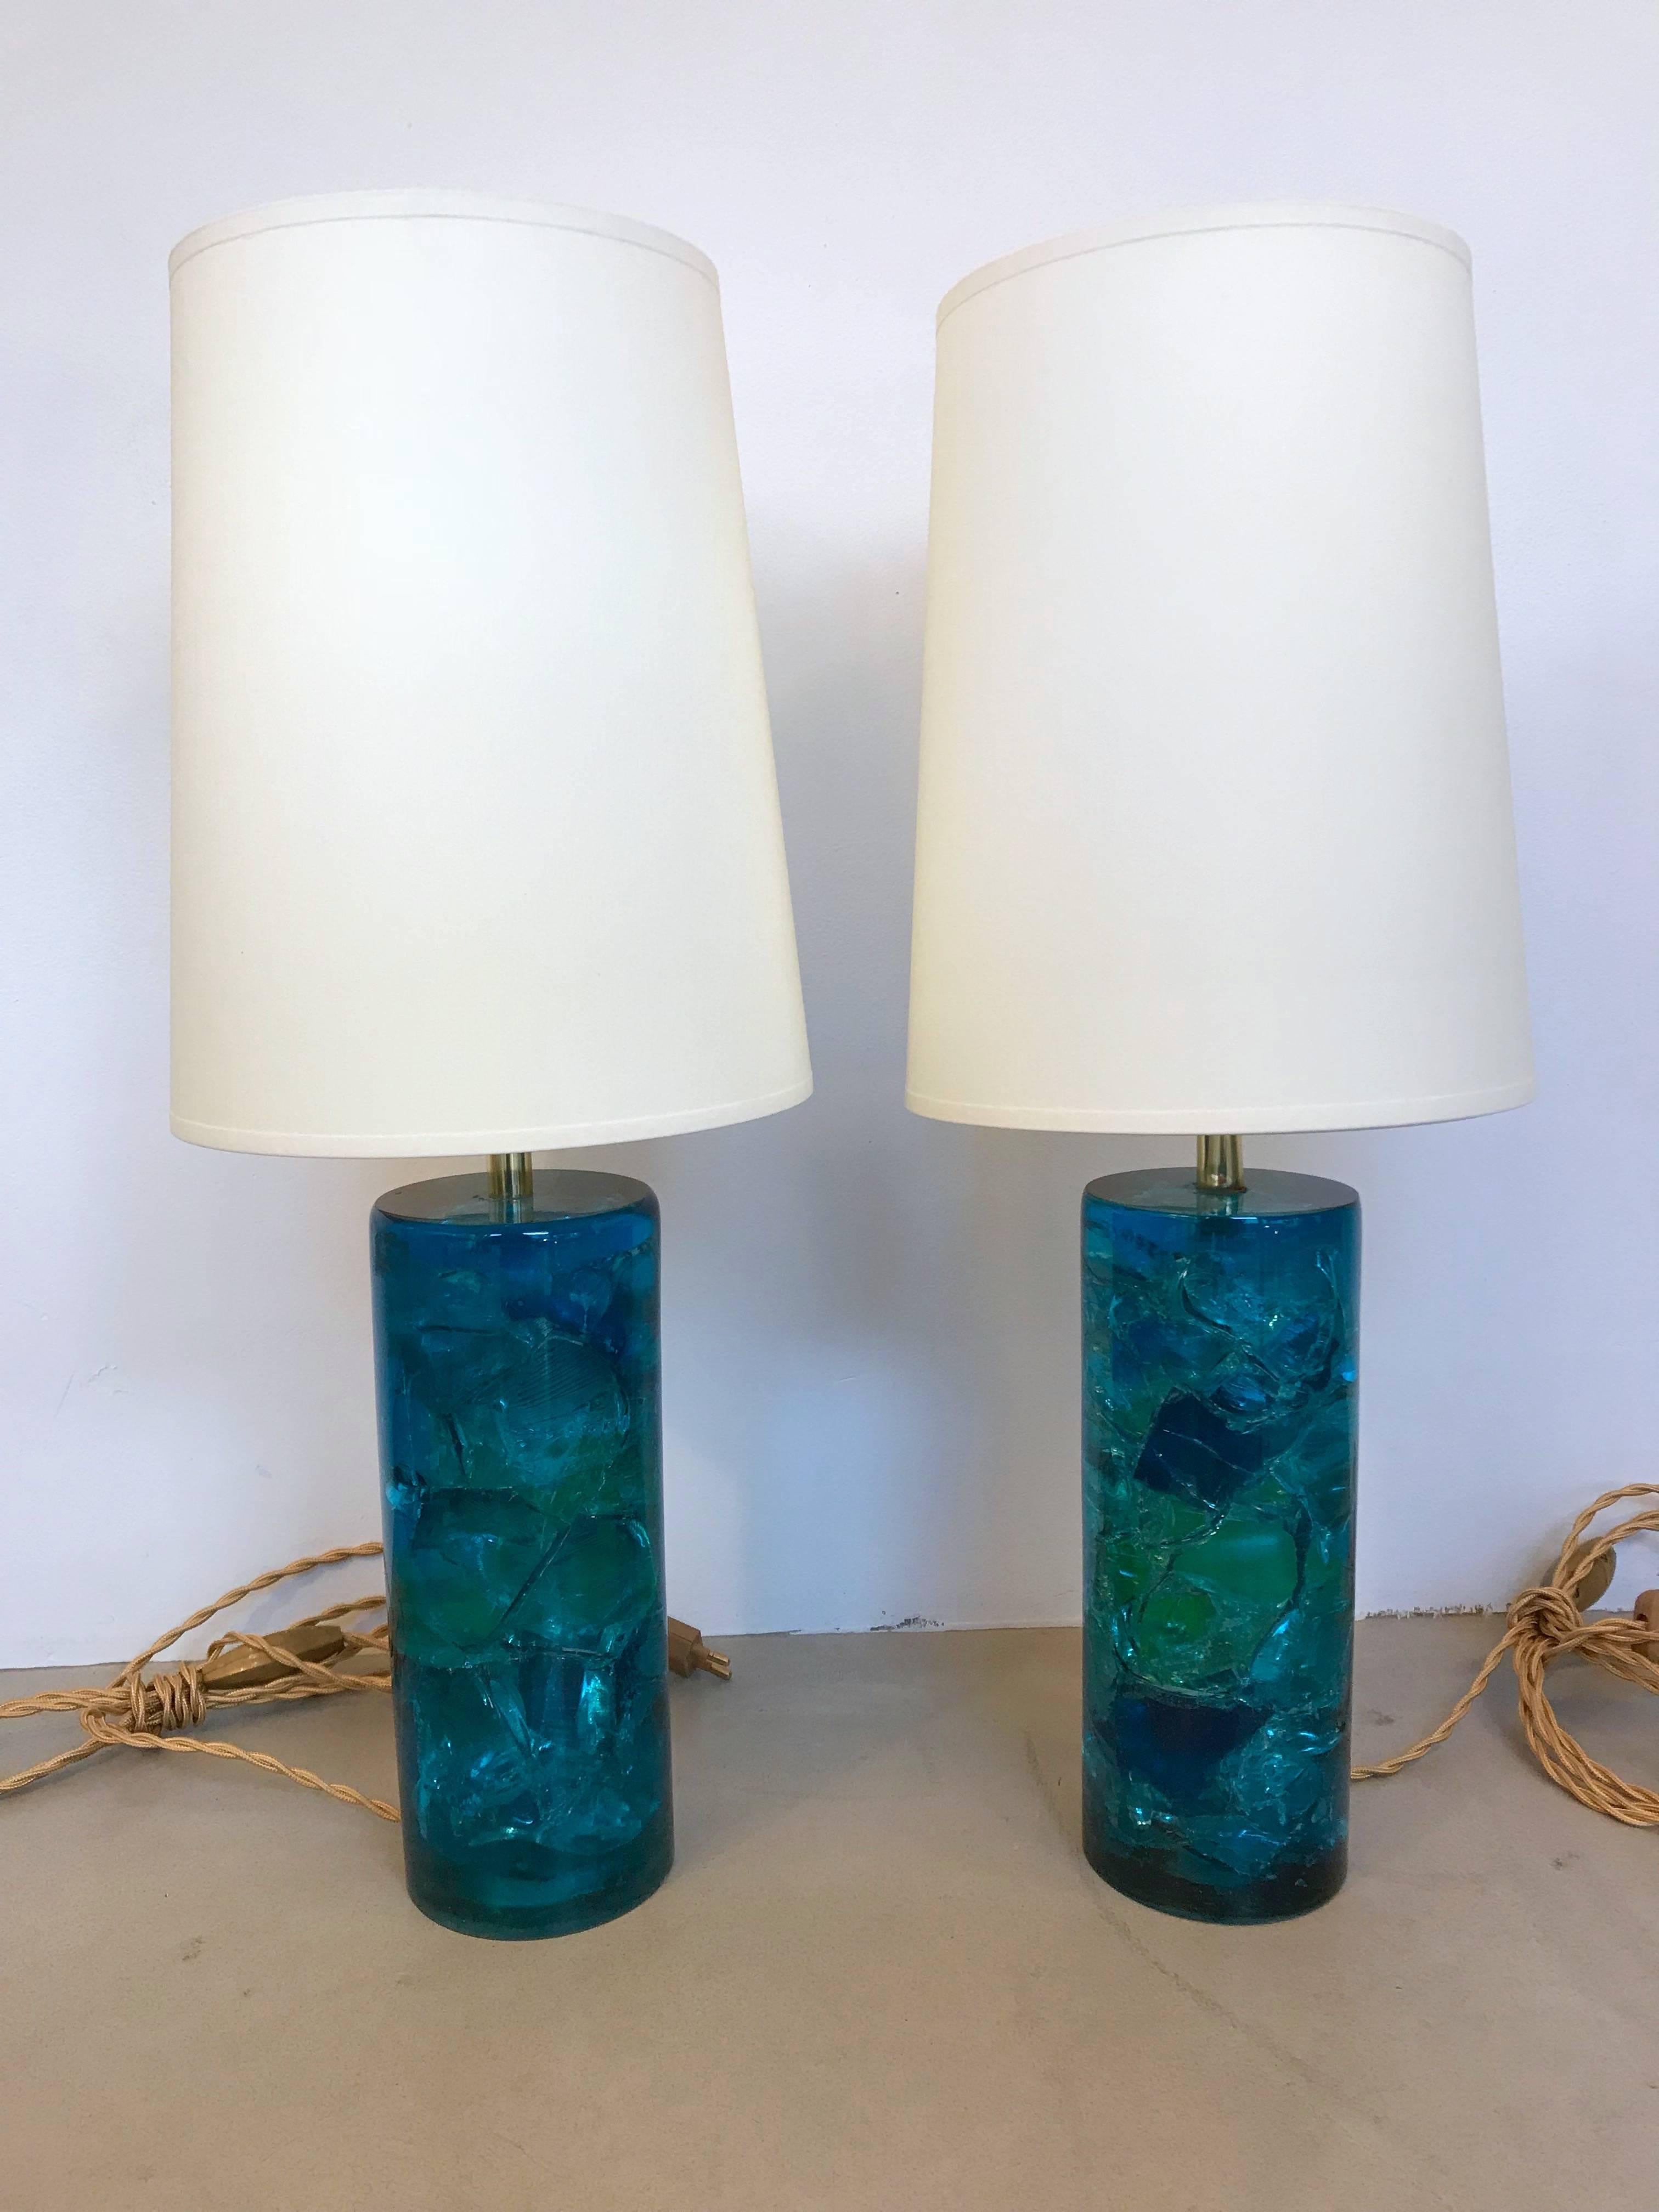 Pair of bedside or table lamps rare bleu fractal resin. In the manner of Pierre Giraudon, François Godebski, Marie Claude Fouquières. Measure: Height resin sculpture 23 cms.